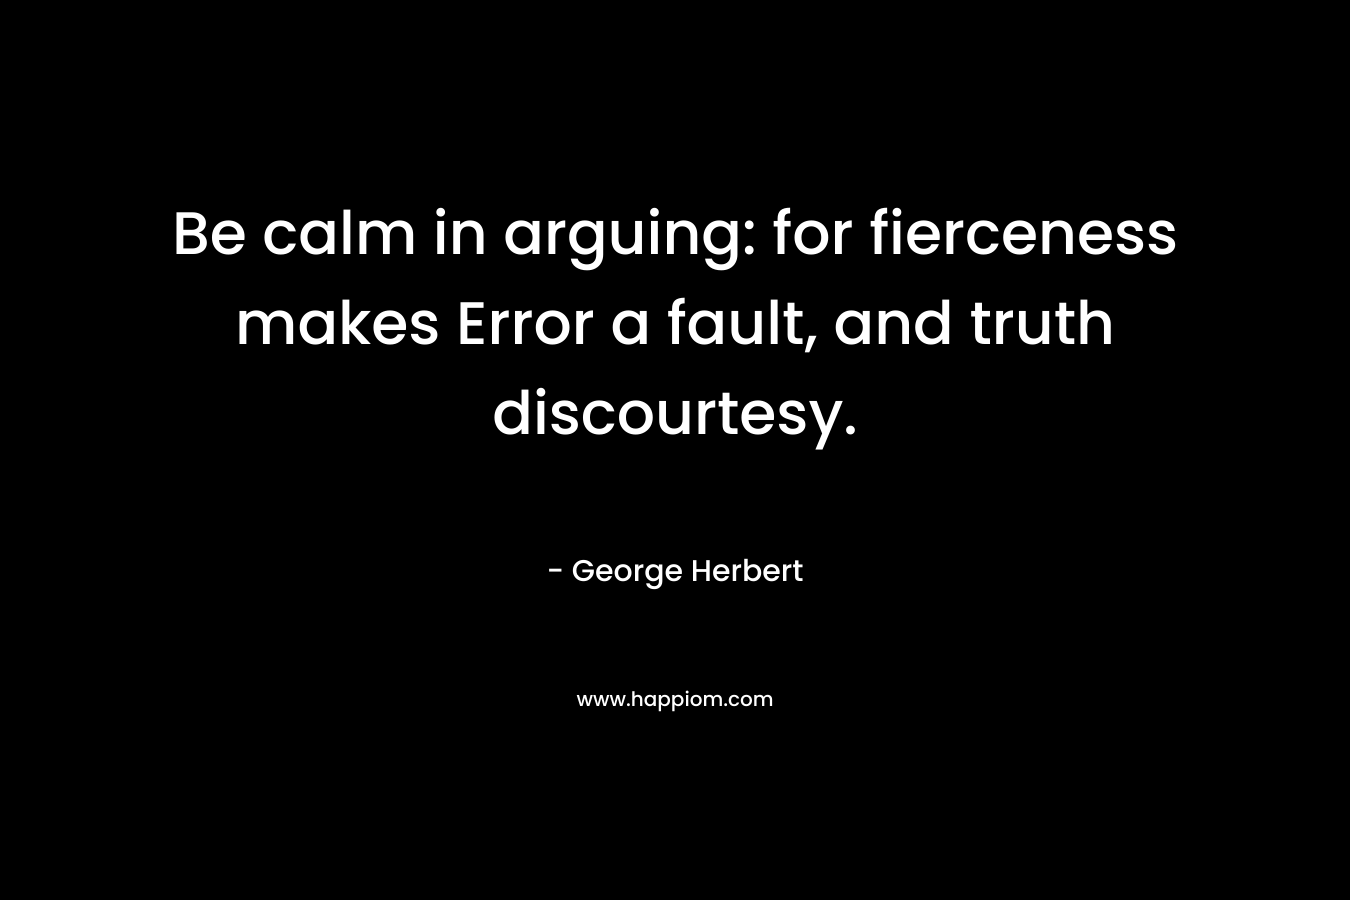 Be calm in arguing: for fierceness makes Error a fault, and truth discourtesy. – George Herbert